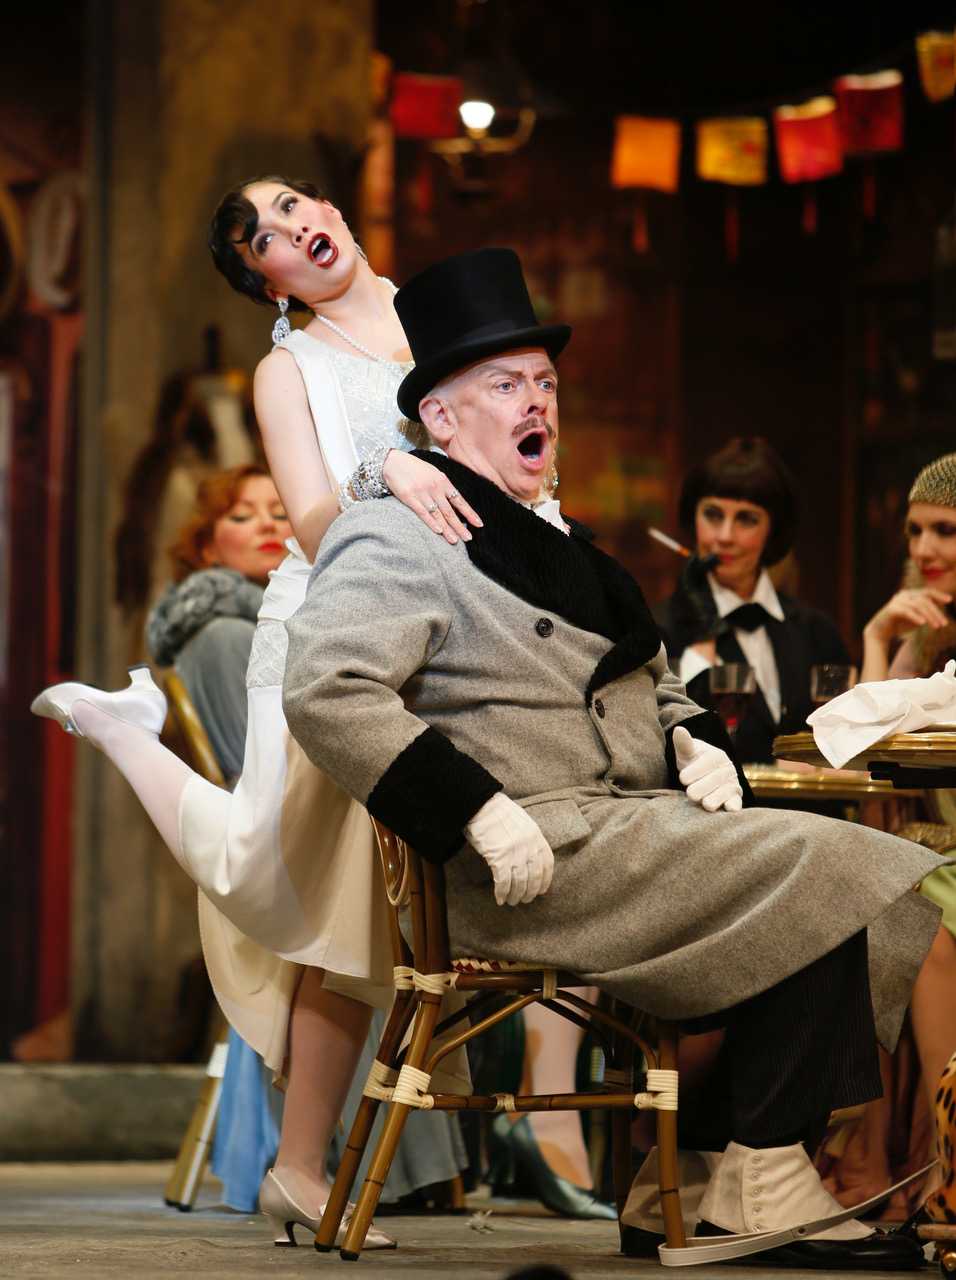 Patrick Raftery onstage with Sharleen Joynt in a production of La Bohème with Vancouver Opera.